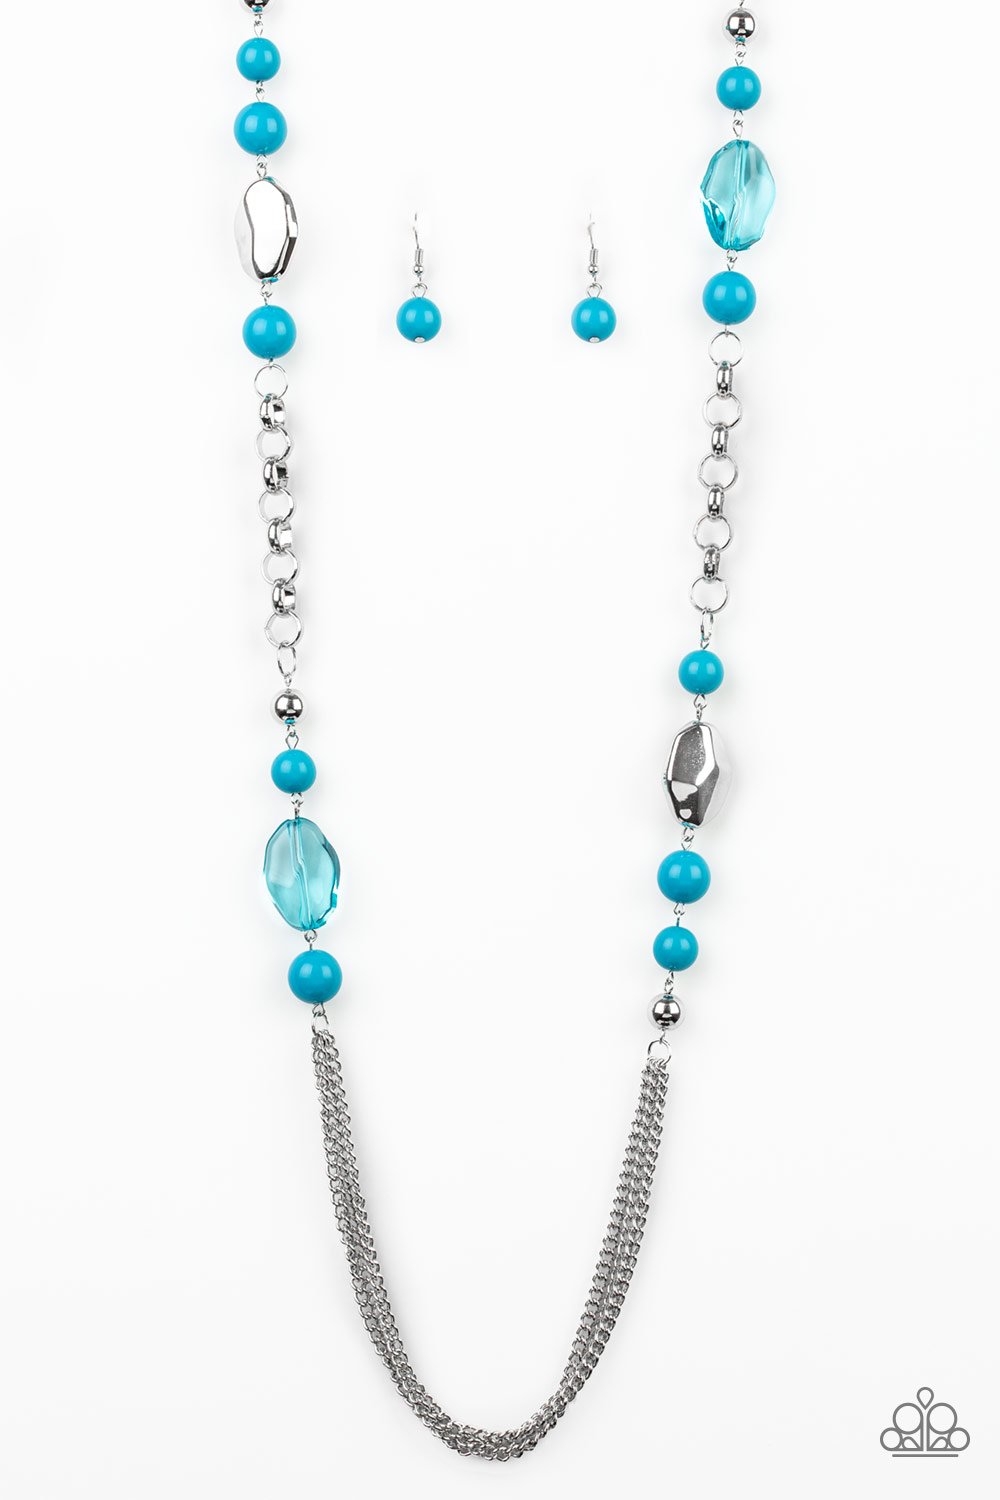 &lt;span&gt;A collection of faceted silver, crystal-like blue, polished blue, and silver beads give way to layers of shimmery silver chains for a whimsical look. Features an adjustable clasp closure.&lt;/span&gt;